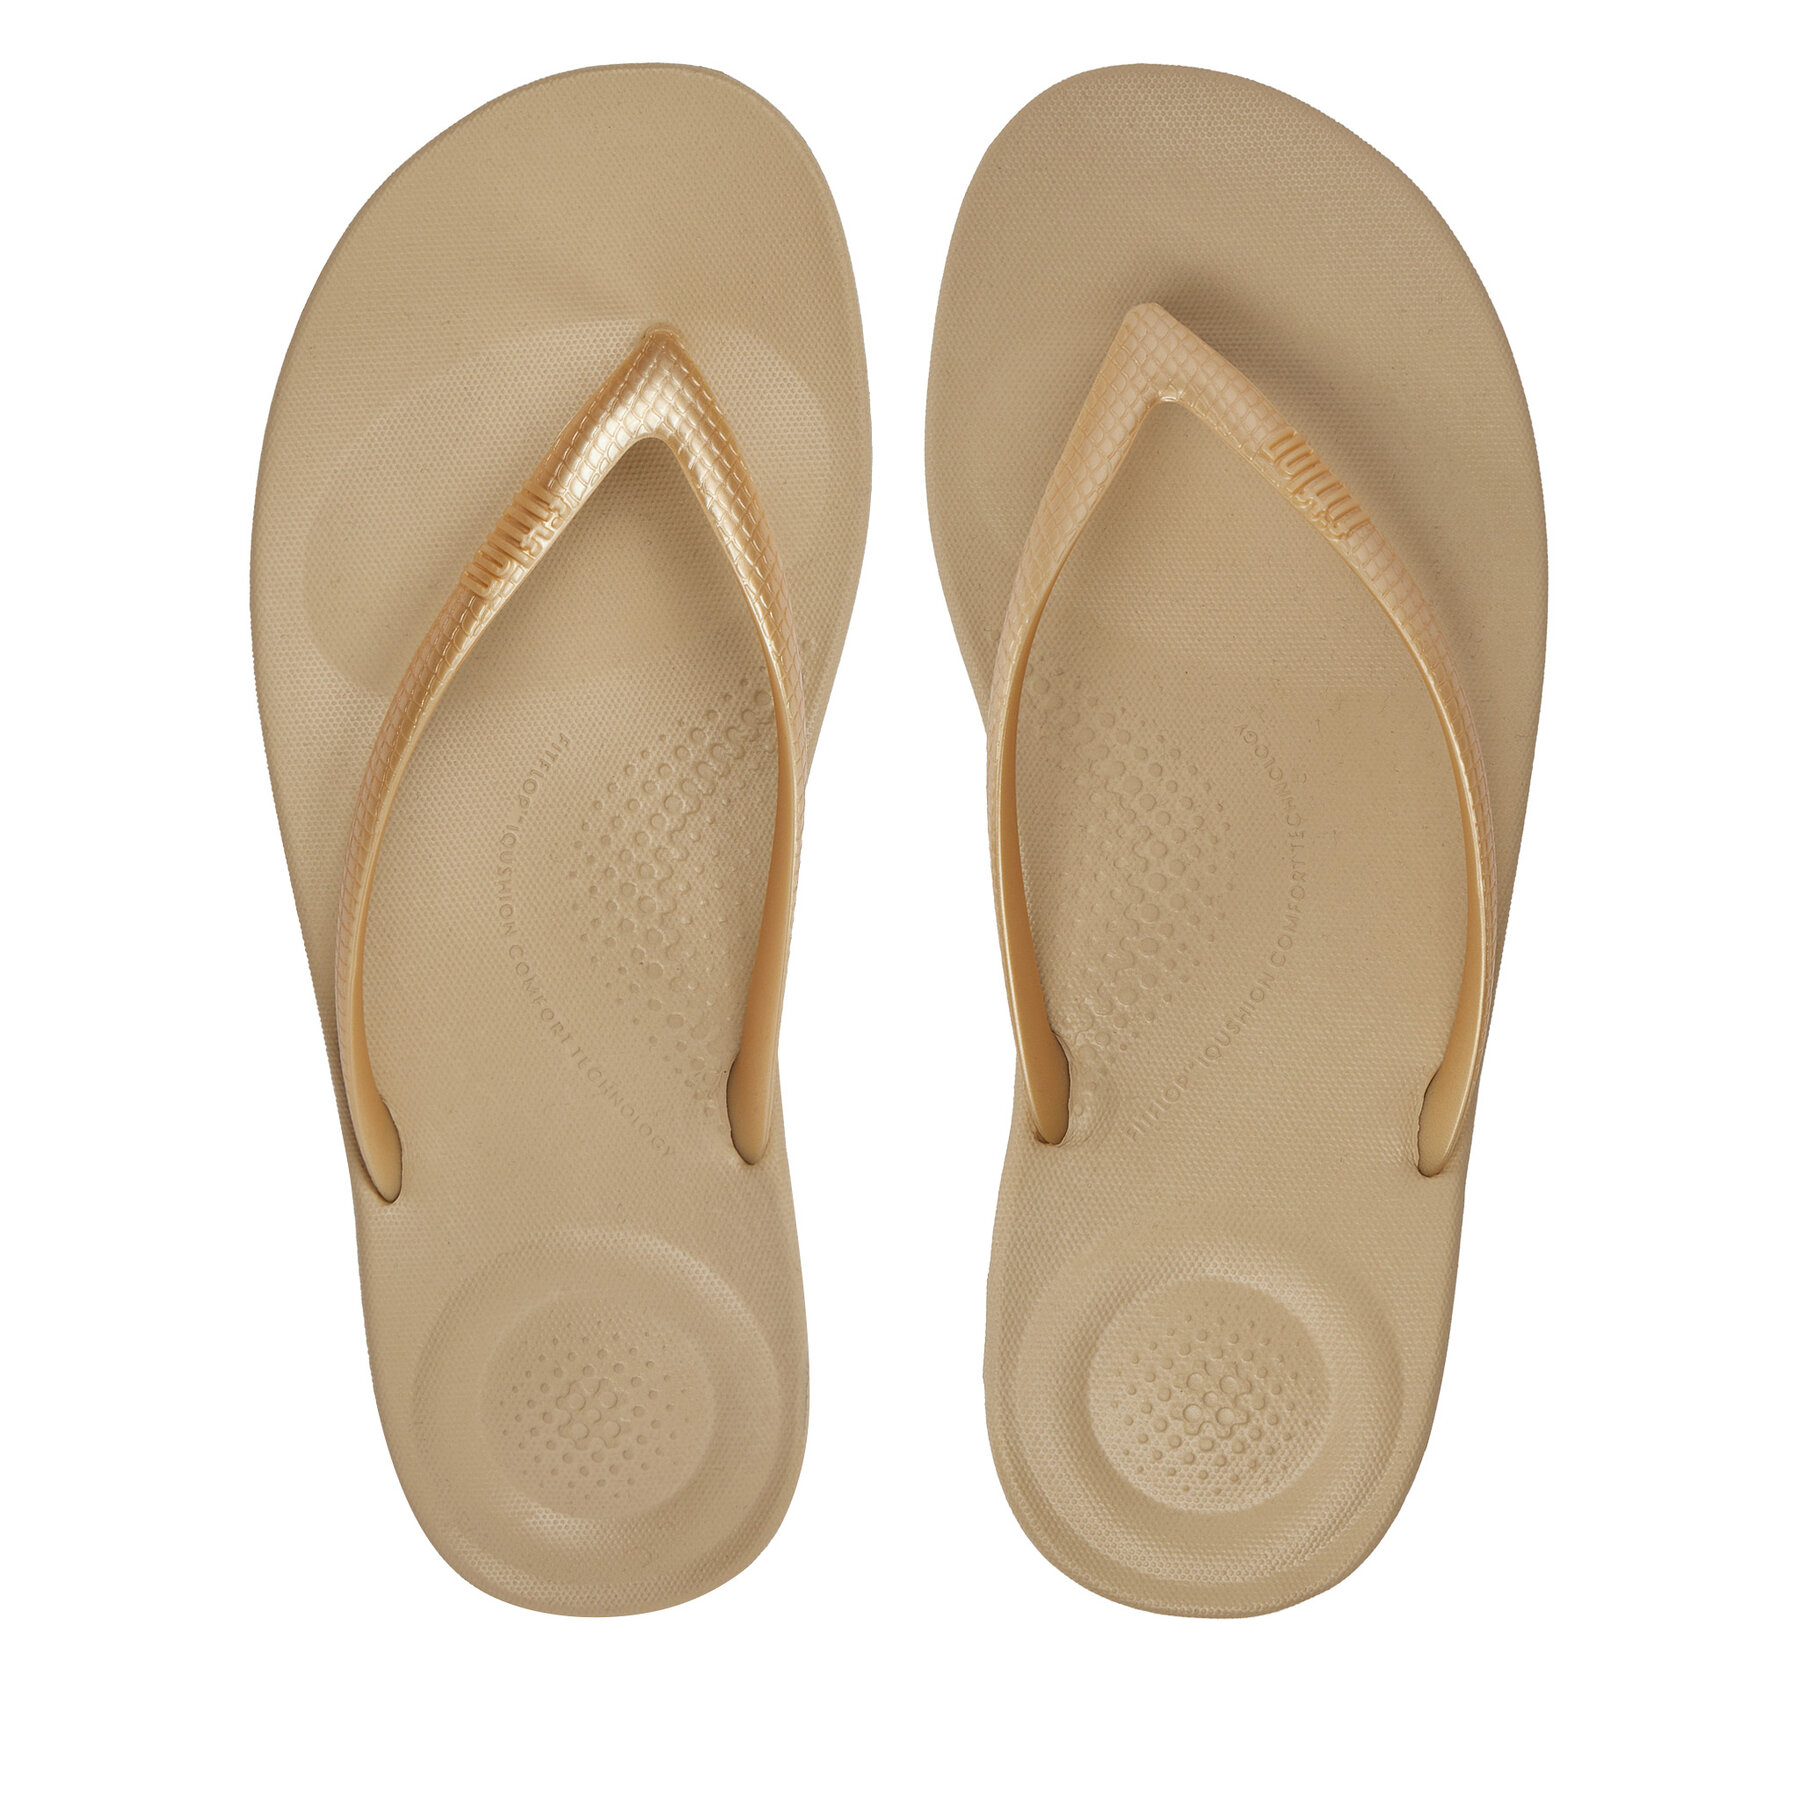 Zehentrenner FitFlop Iqushion E54 Gold 010 von FitFlop